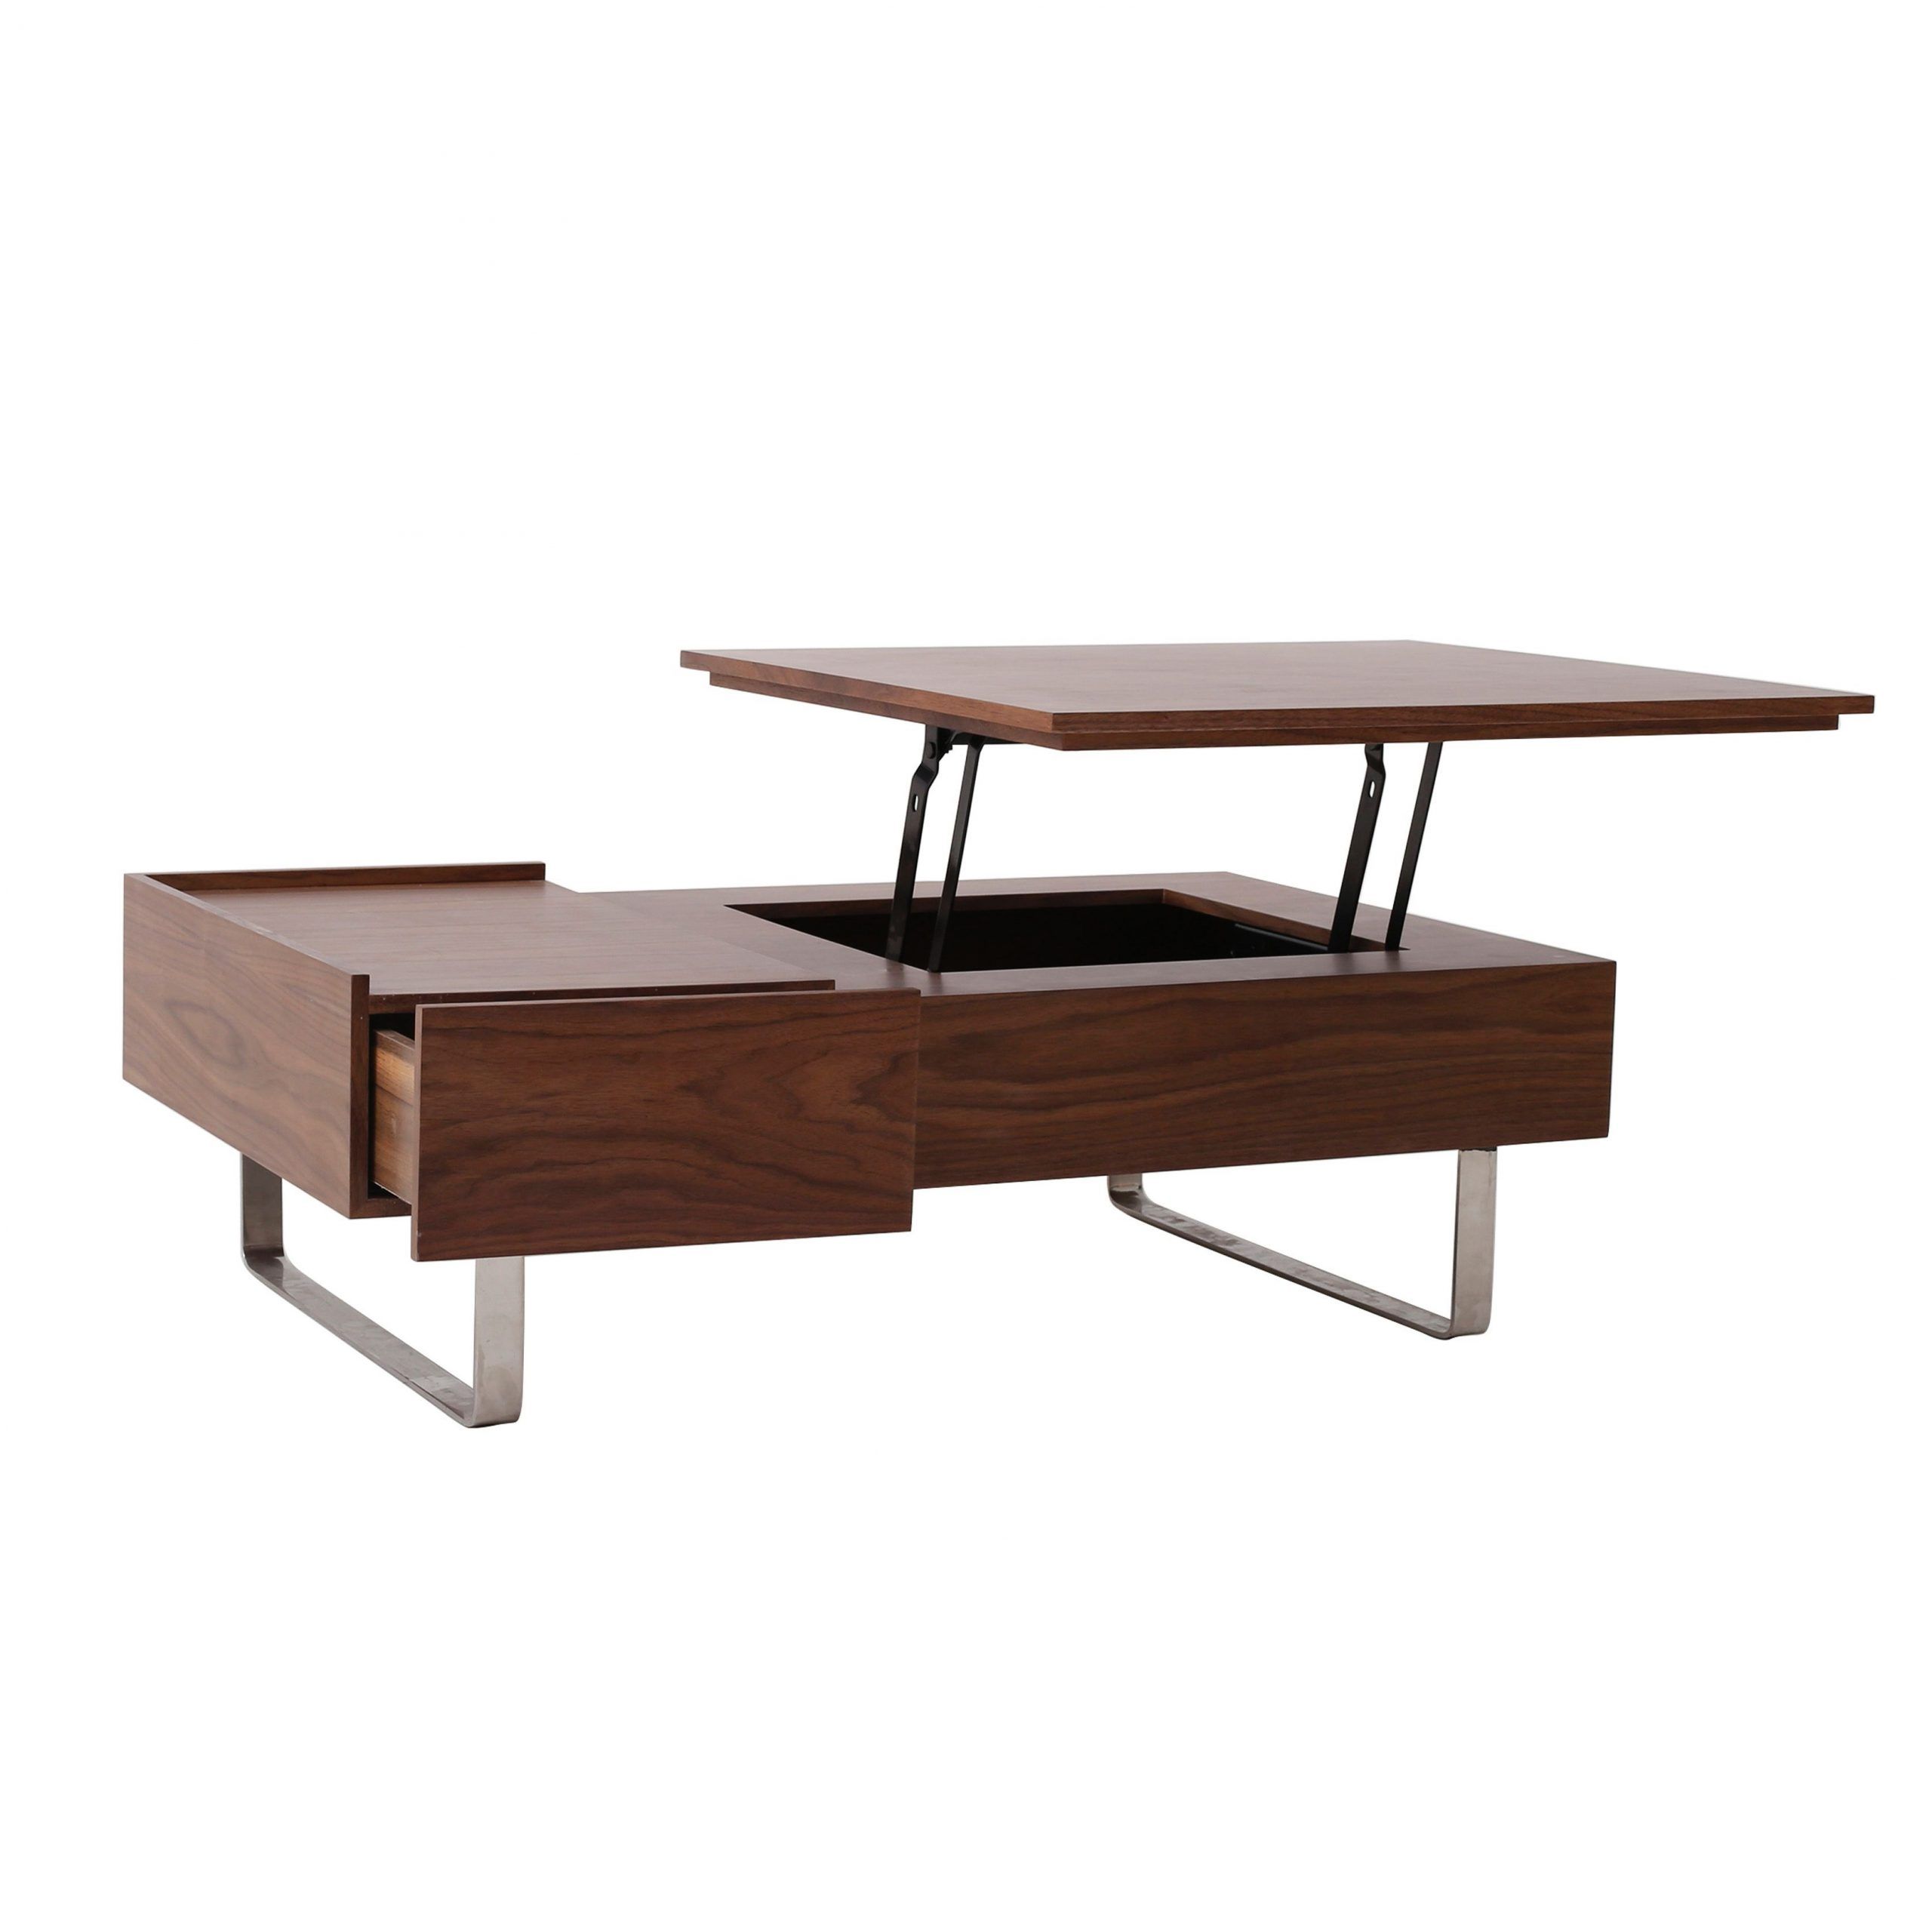 Denzel Kd Rectangular Coffee Table W/ Open Mechanism With Regard To Trendy Open Storage Coffee Tables (Gallery 8 of 20)